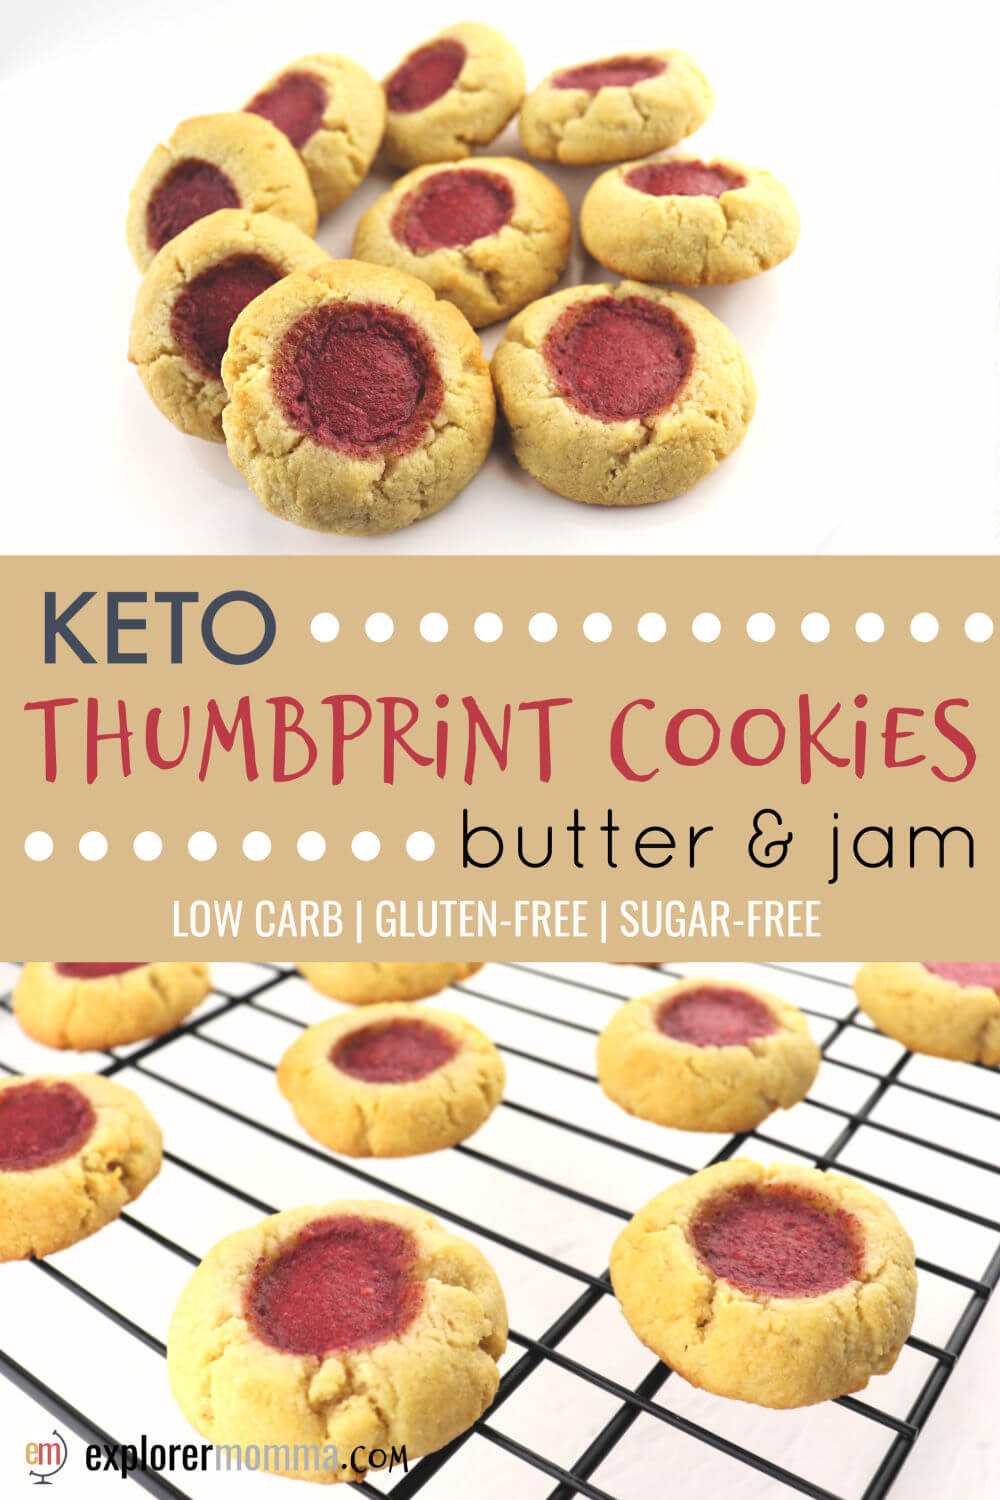 Butter and jam low carb keto thumbprint cookies are melt in your mouth gluten-free delicious. Sugar-free and kid-friendly, kids love to help make these holiday treats. #ketorecipes #lowcarbrecipes